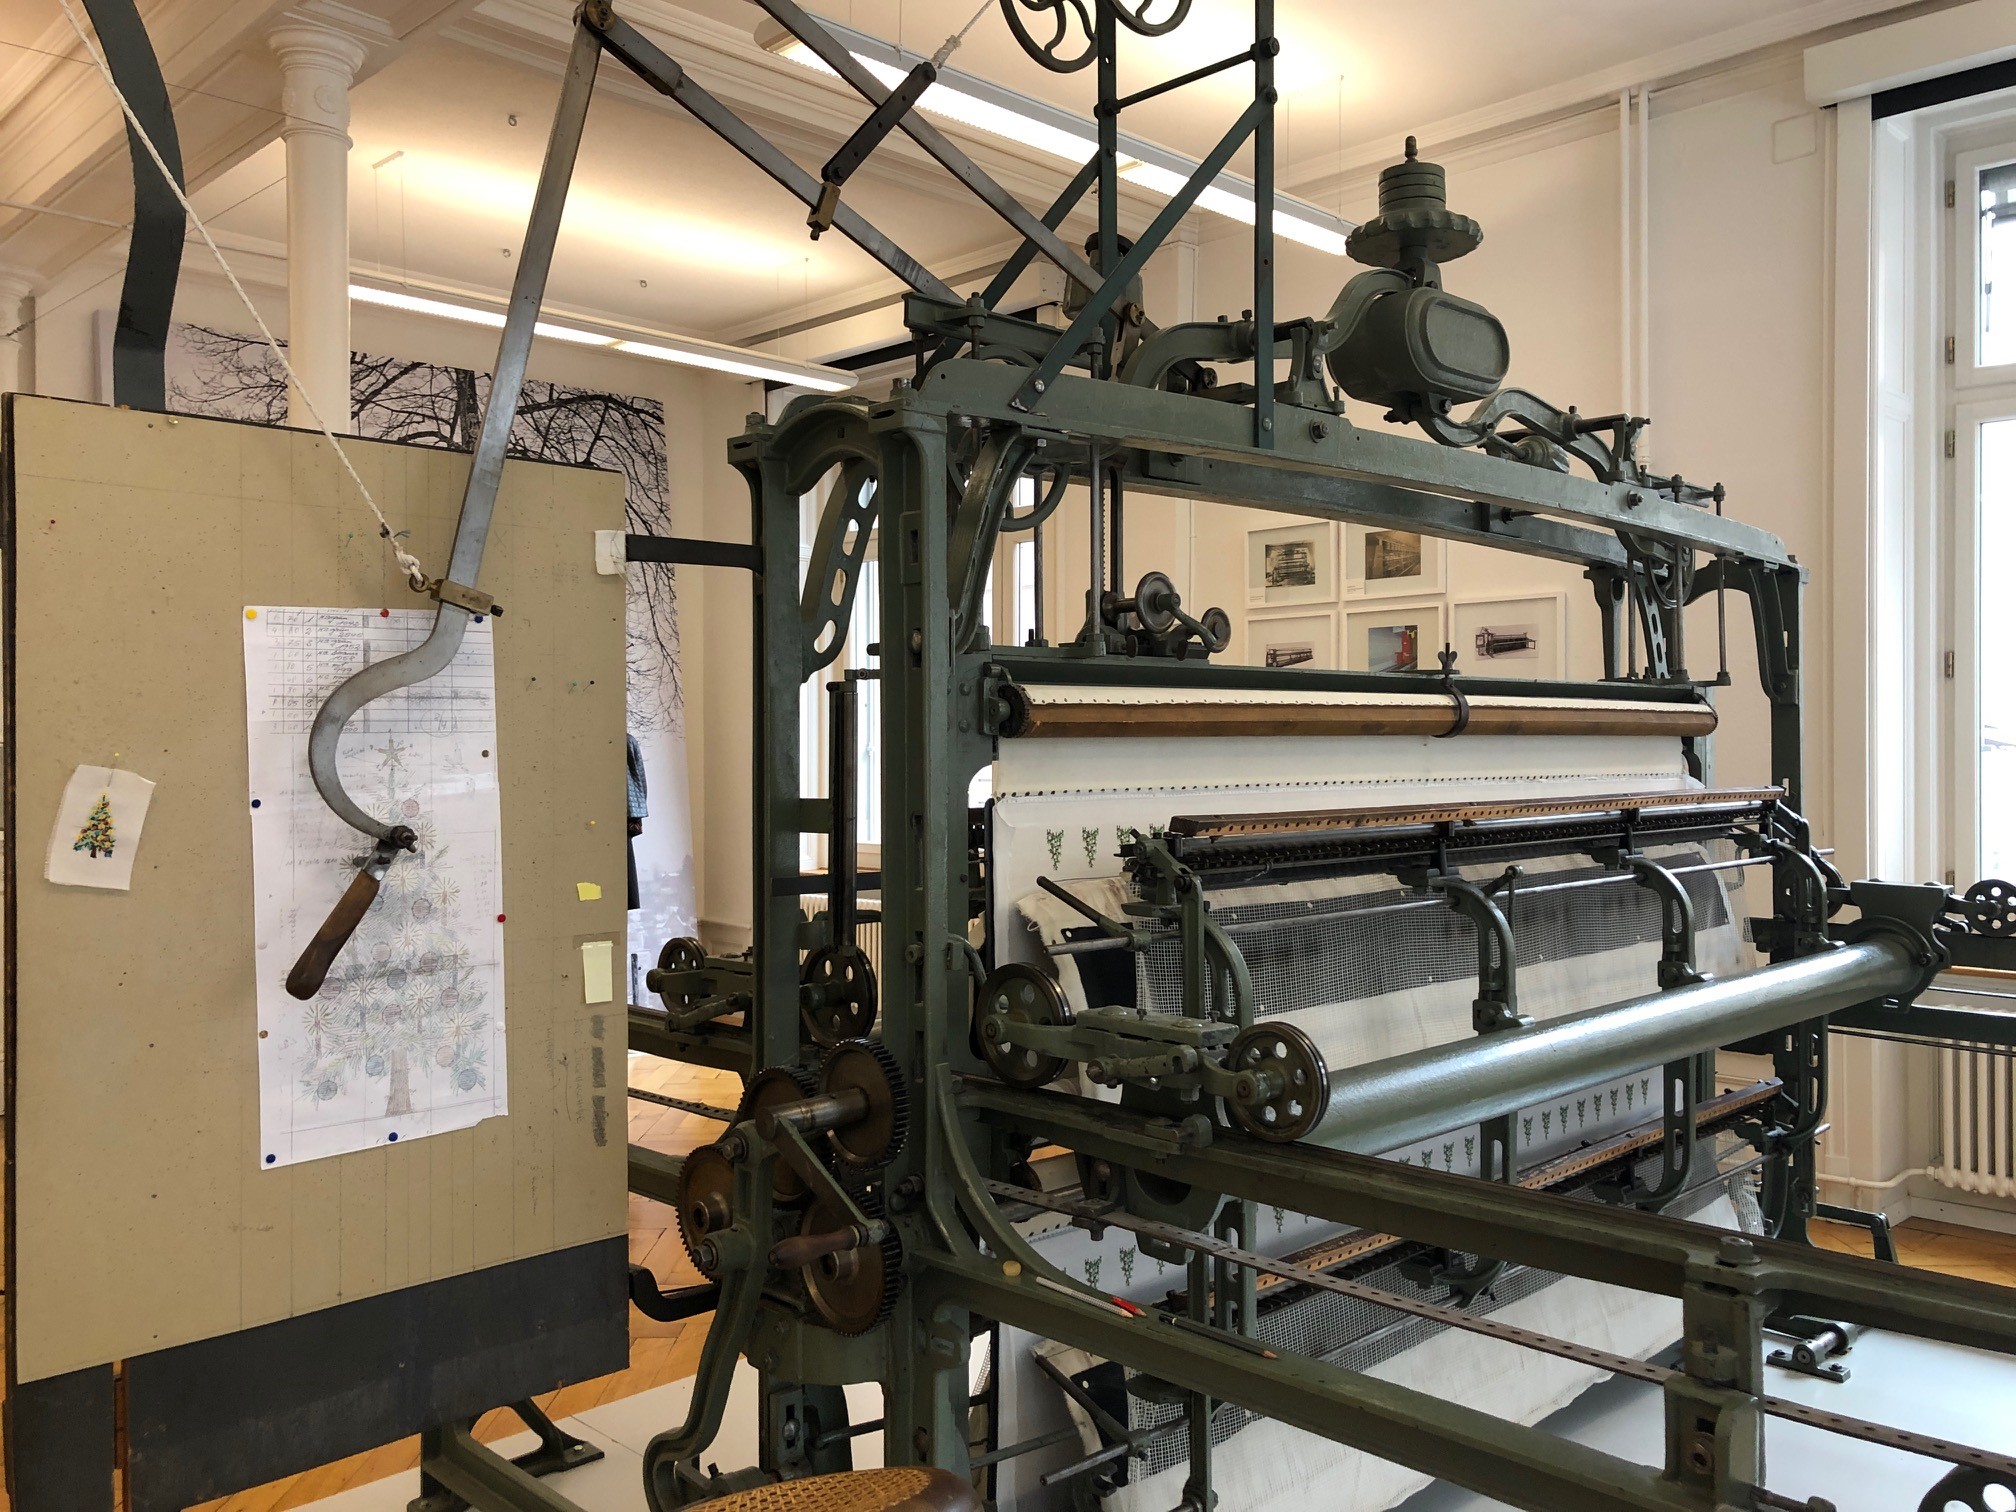 St Gallen embroidery machine of the period.